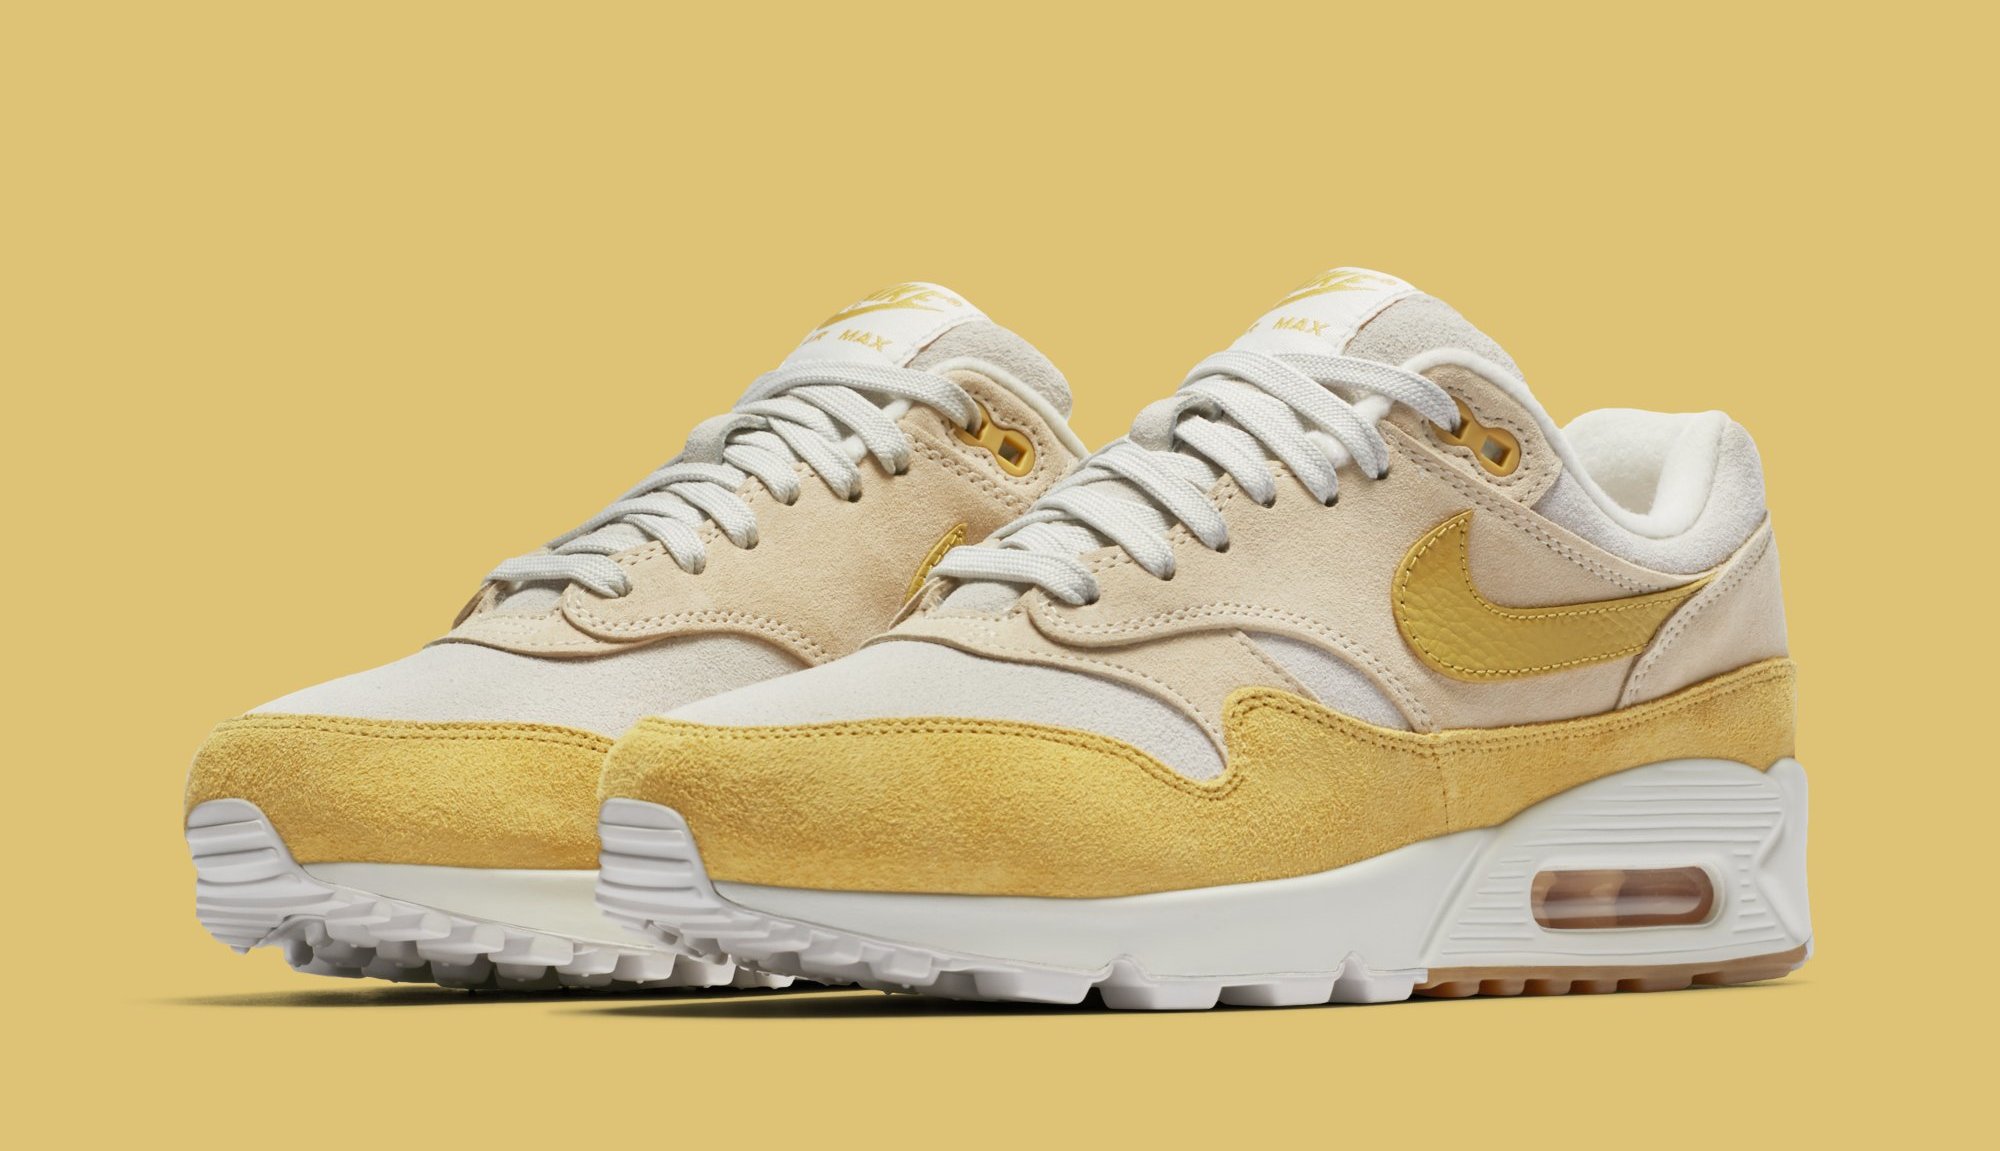 Nike Women's Air Max 90/1 Guava Ice Wheat Gold Summit White AQ1273-800 Release Date | Sole